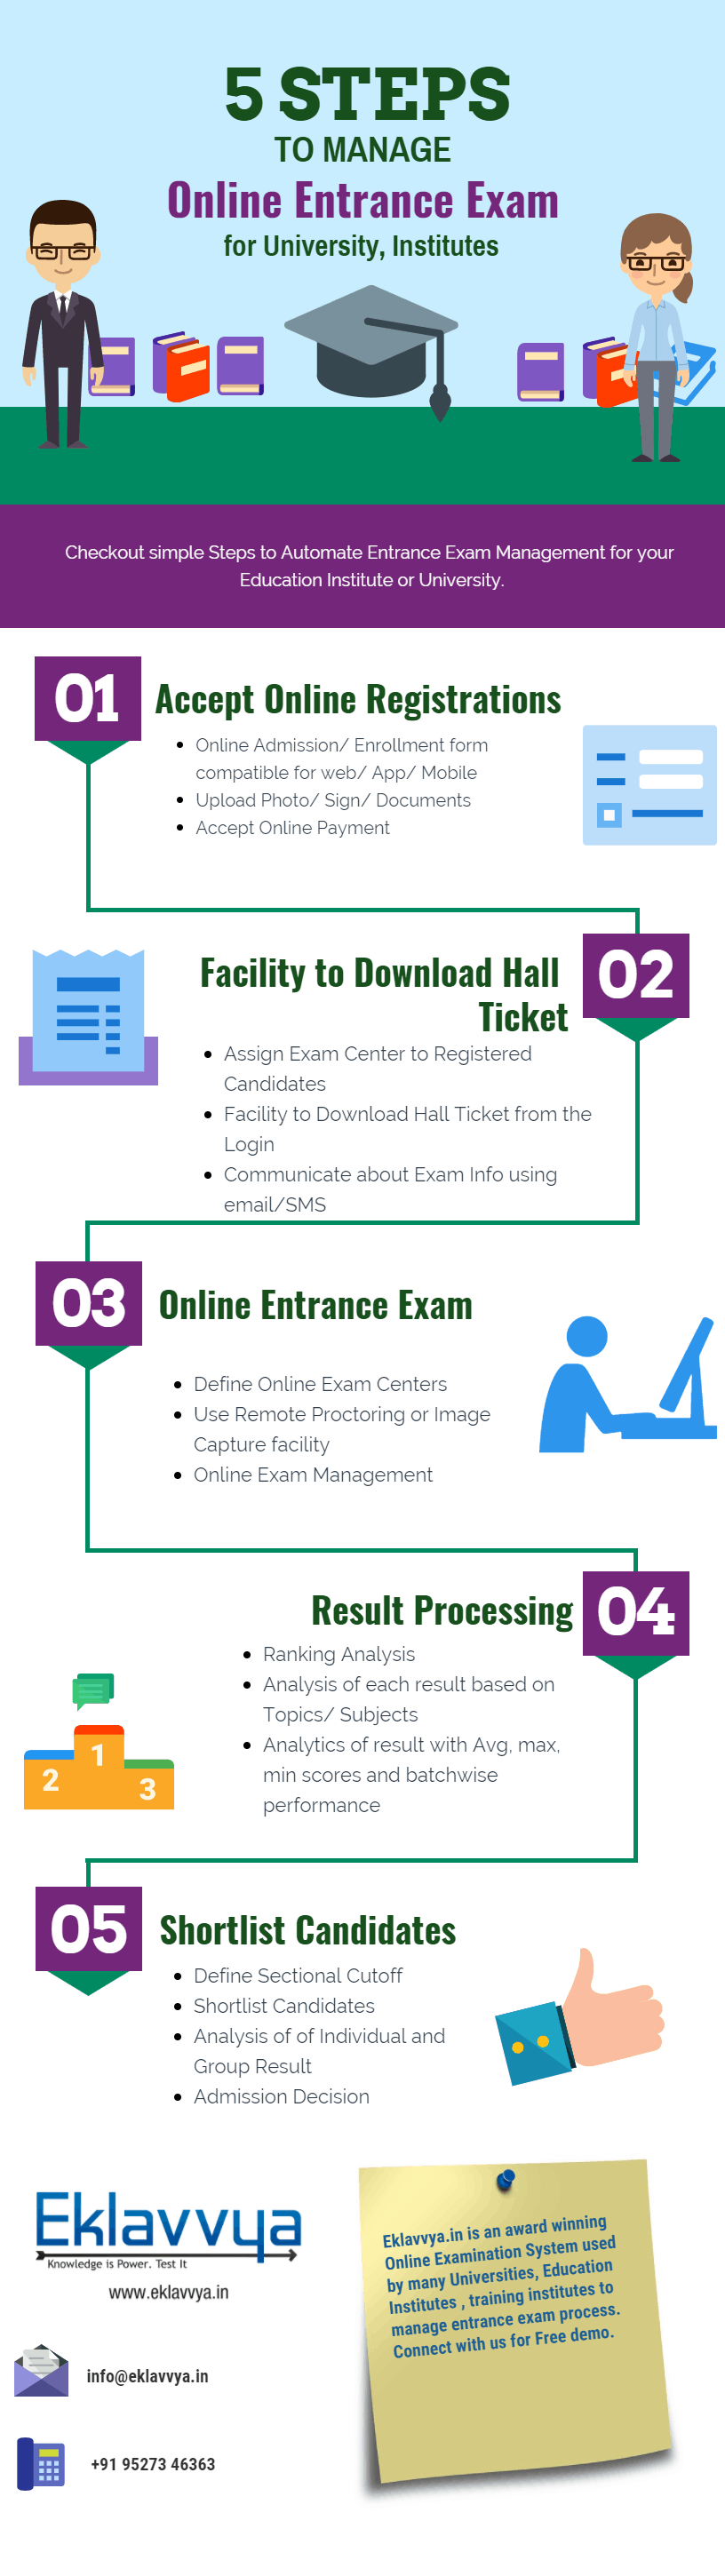 5 Steps to Manage Online Entrance Examination